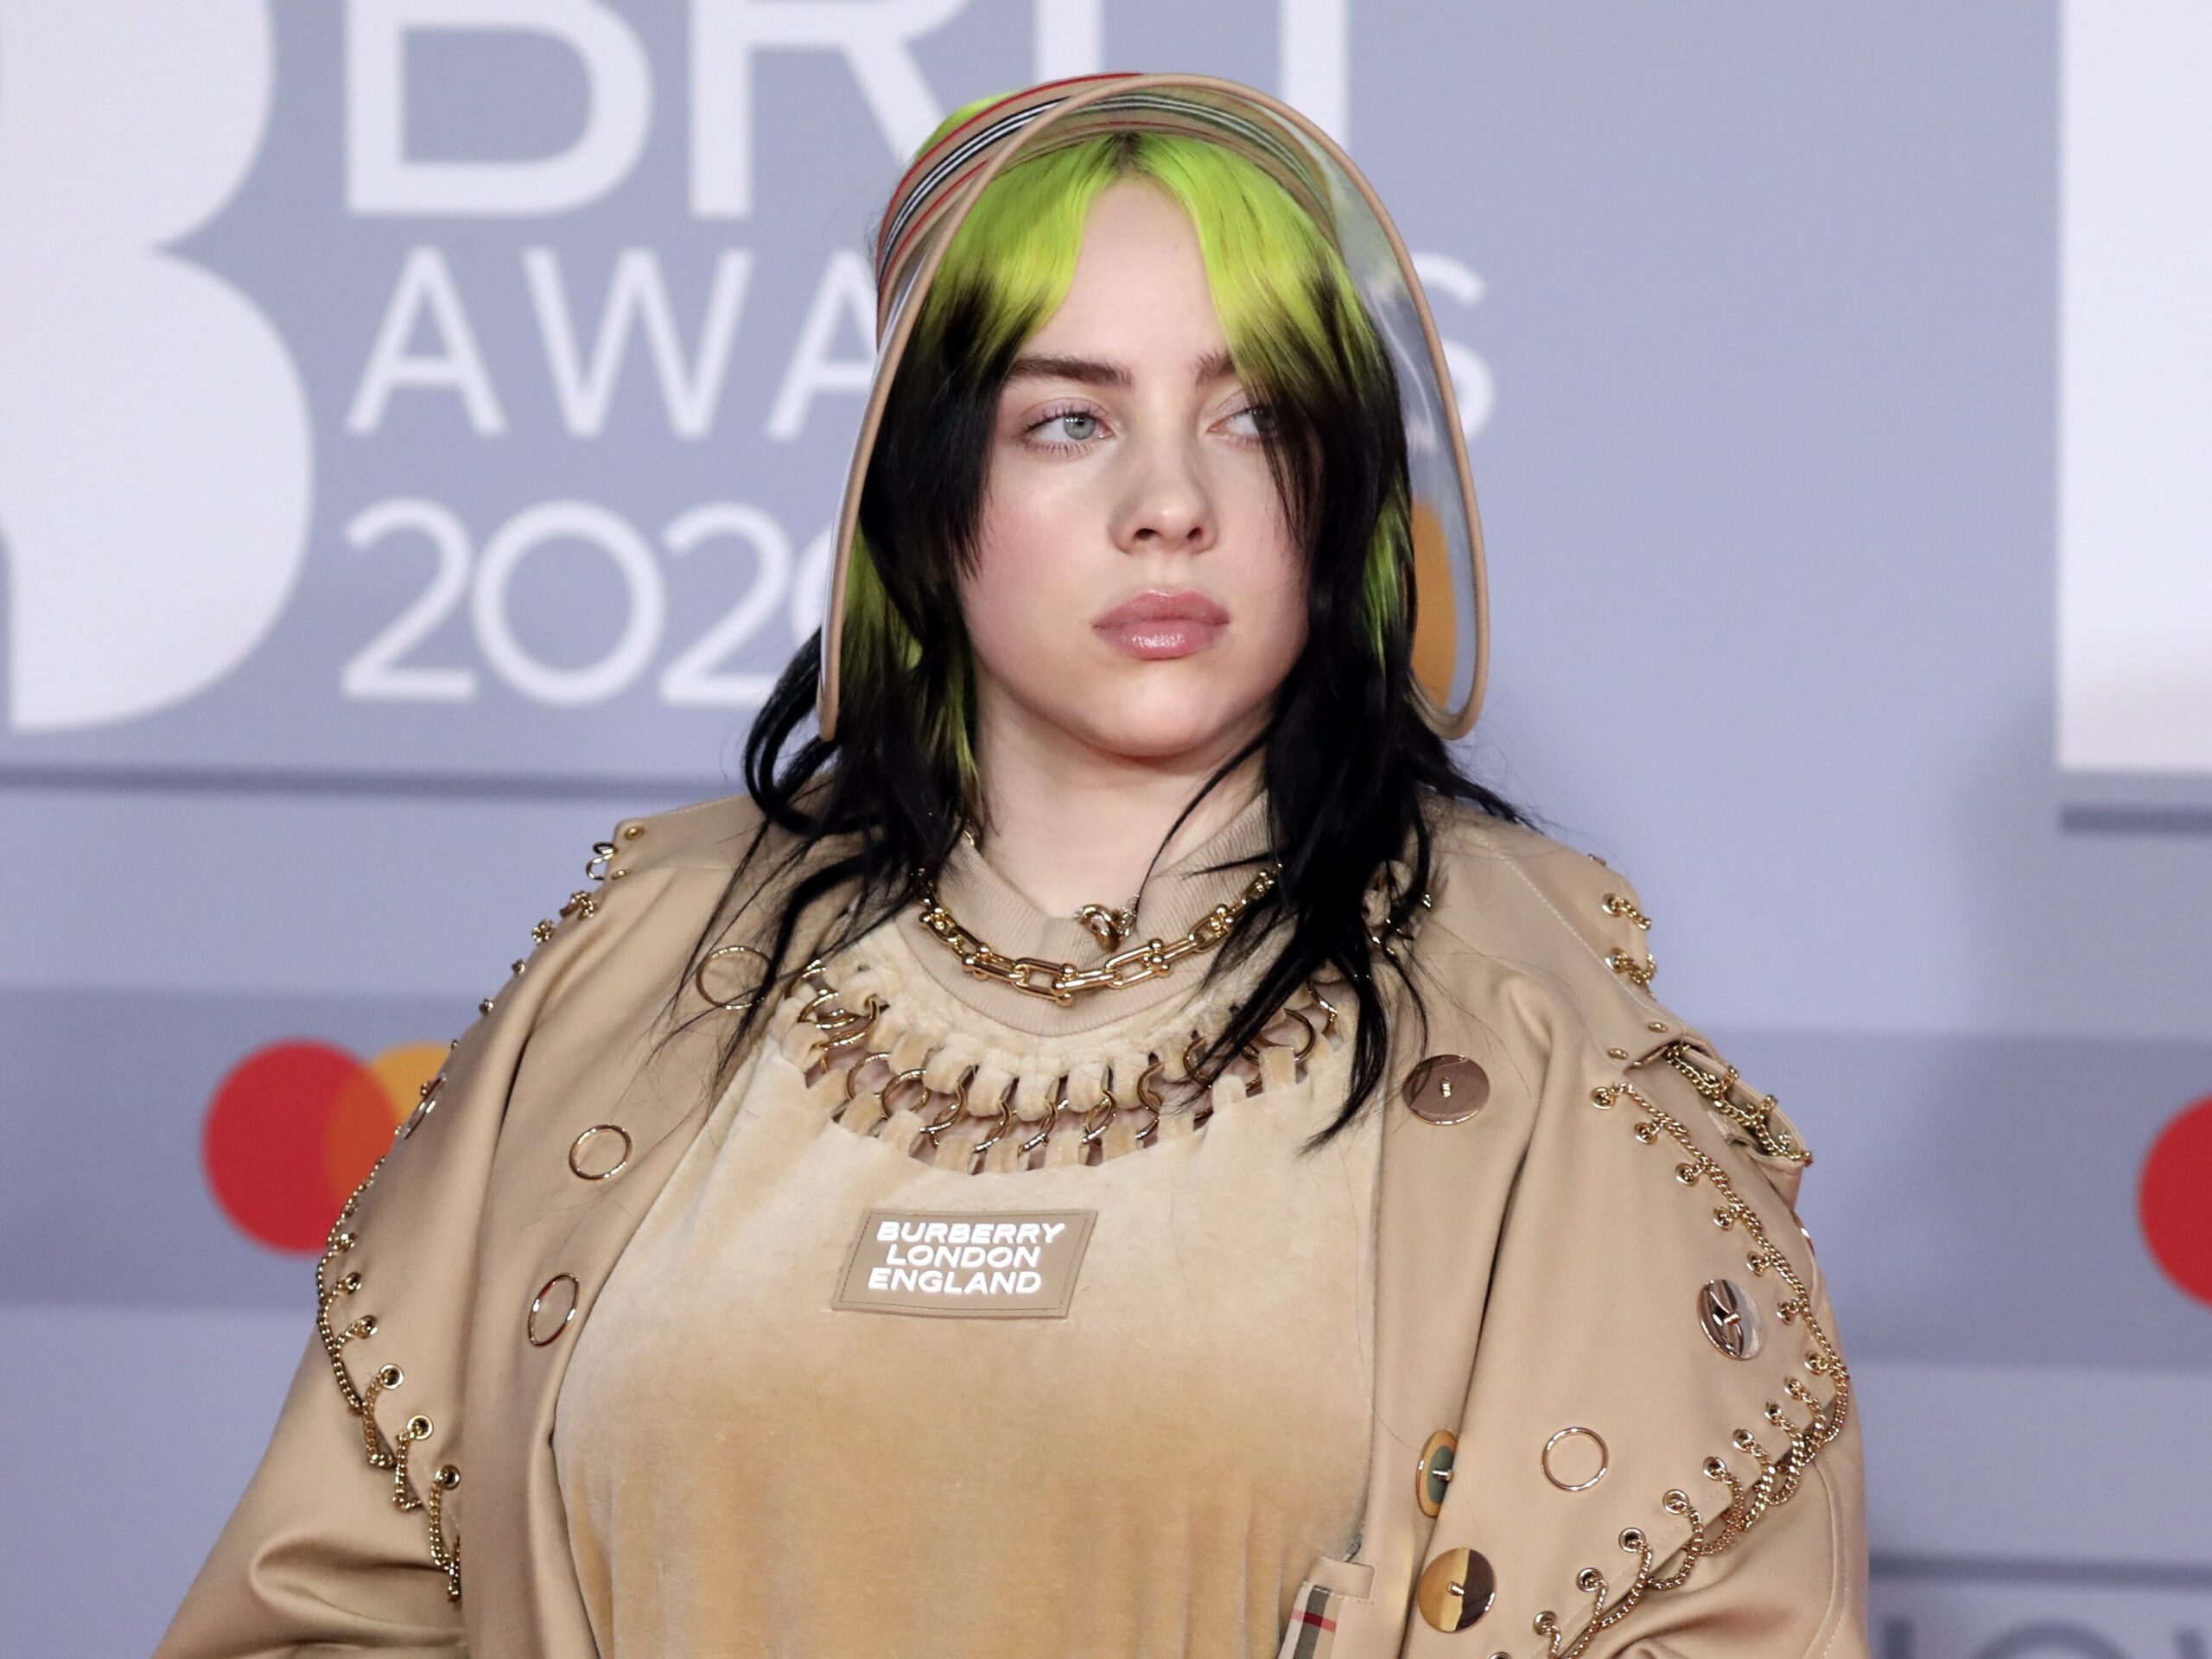 A Collector’s Guide to Billie Eilish Tick Collection